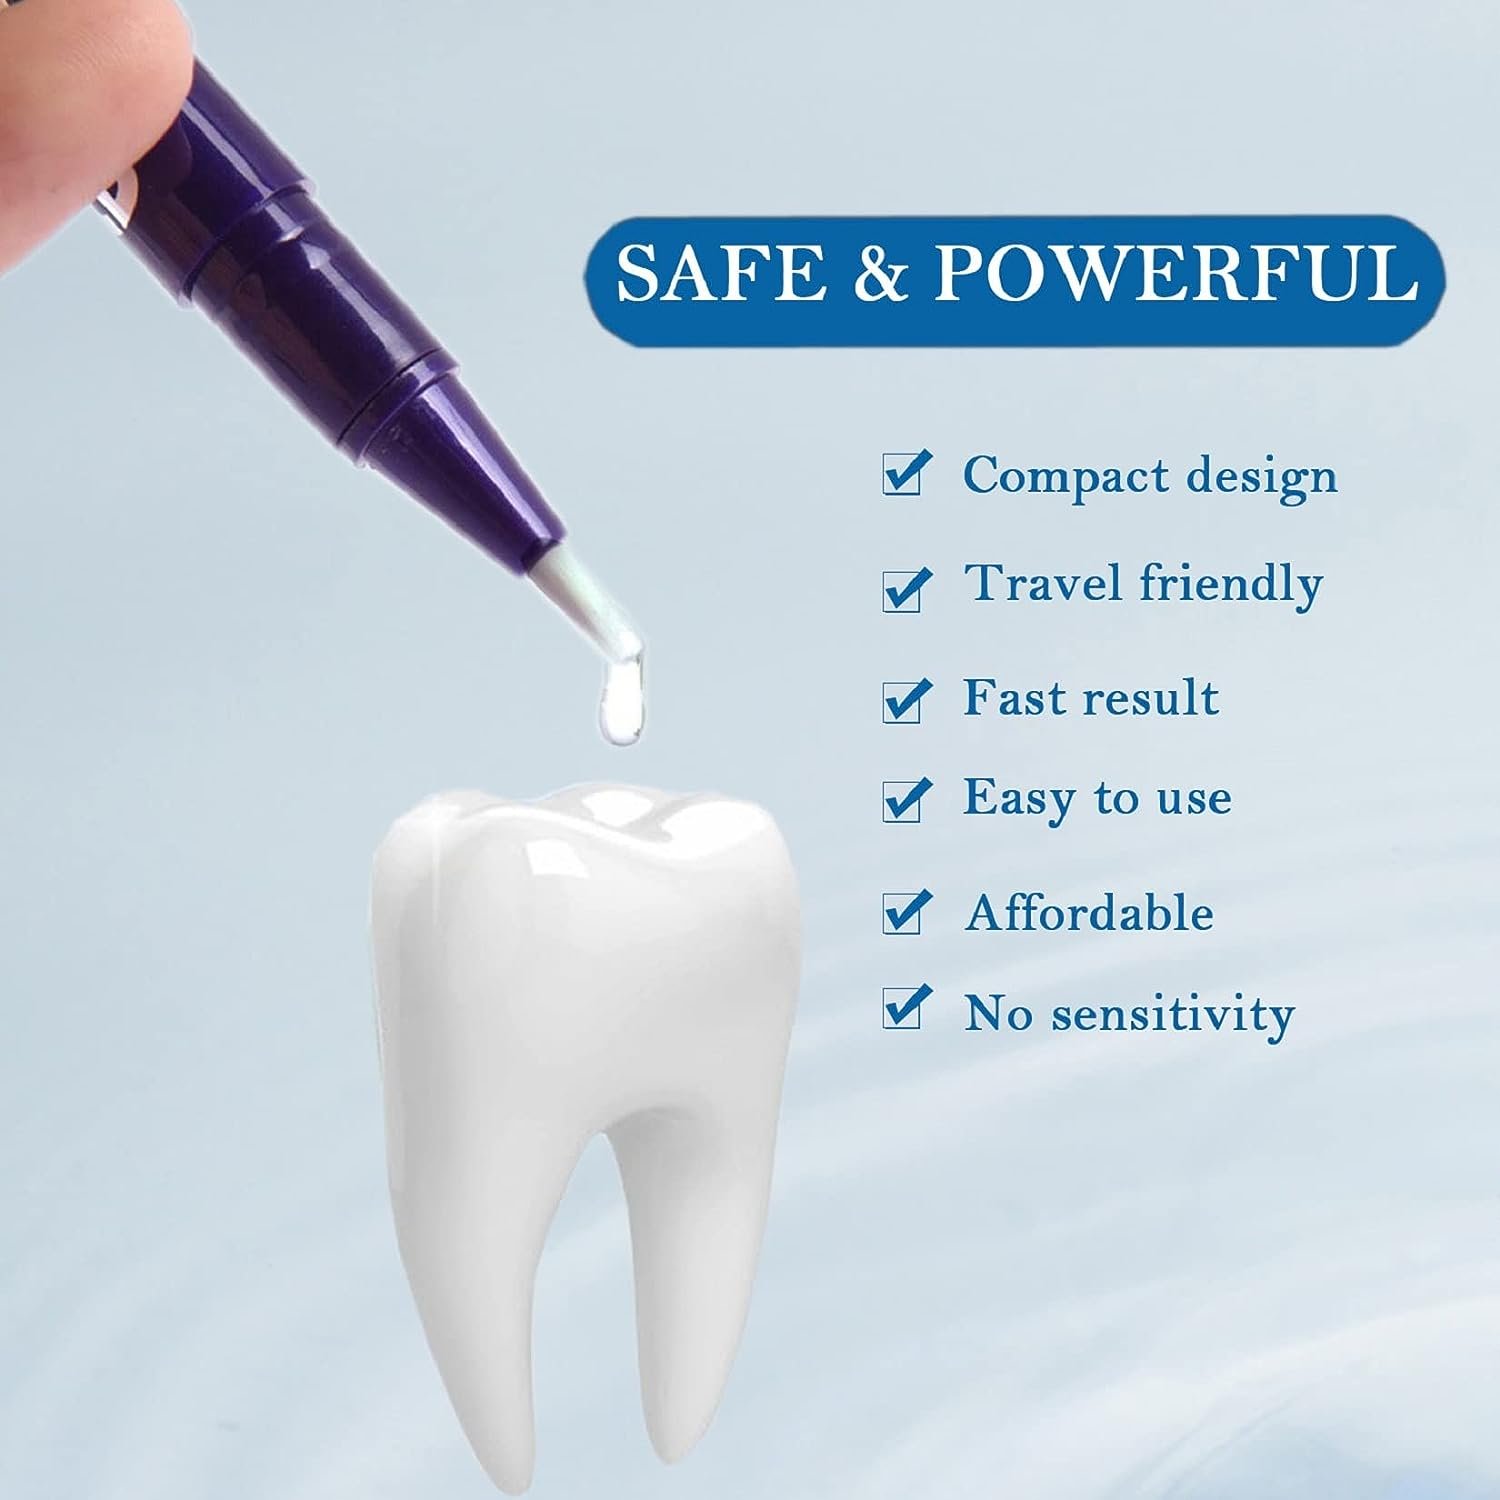 Teeth Whitening Pen, Effective＆Painless, No Sensitivity,Teeth Stain Remover to Whiten Teeth, Travel-Friendly, Easy to Use, Beautiful White SmileWhiten Teeth, Become More Confident and Attractive